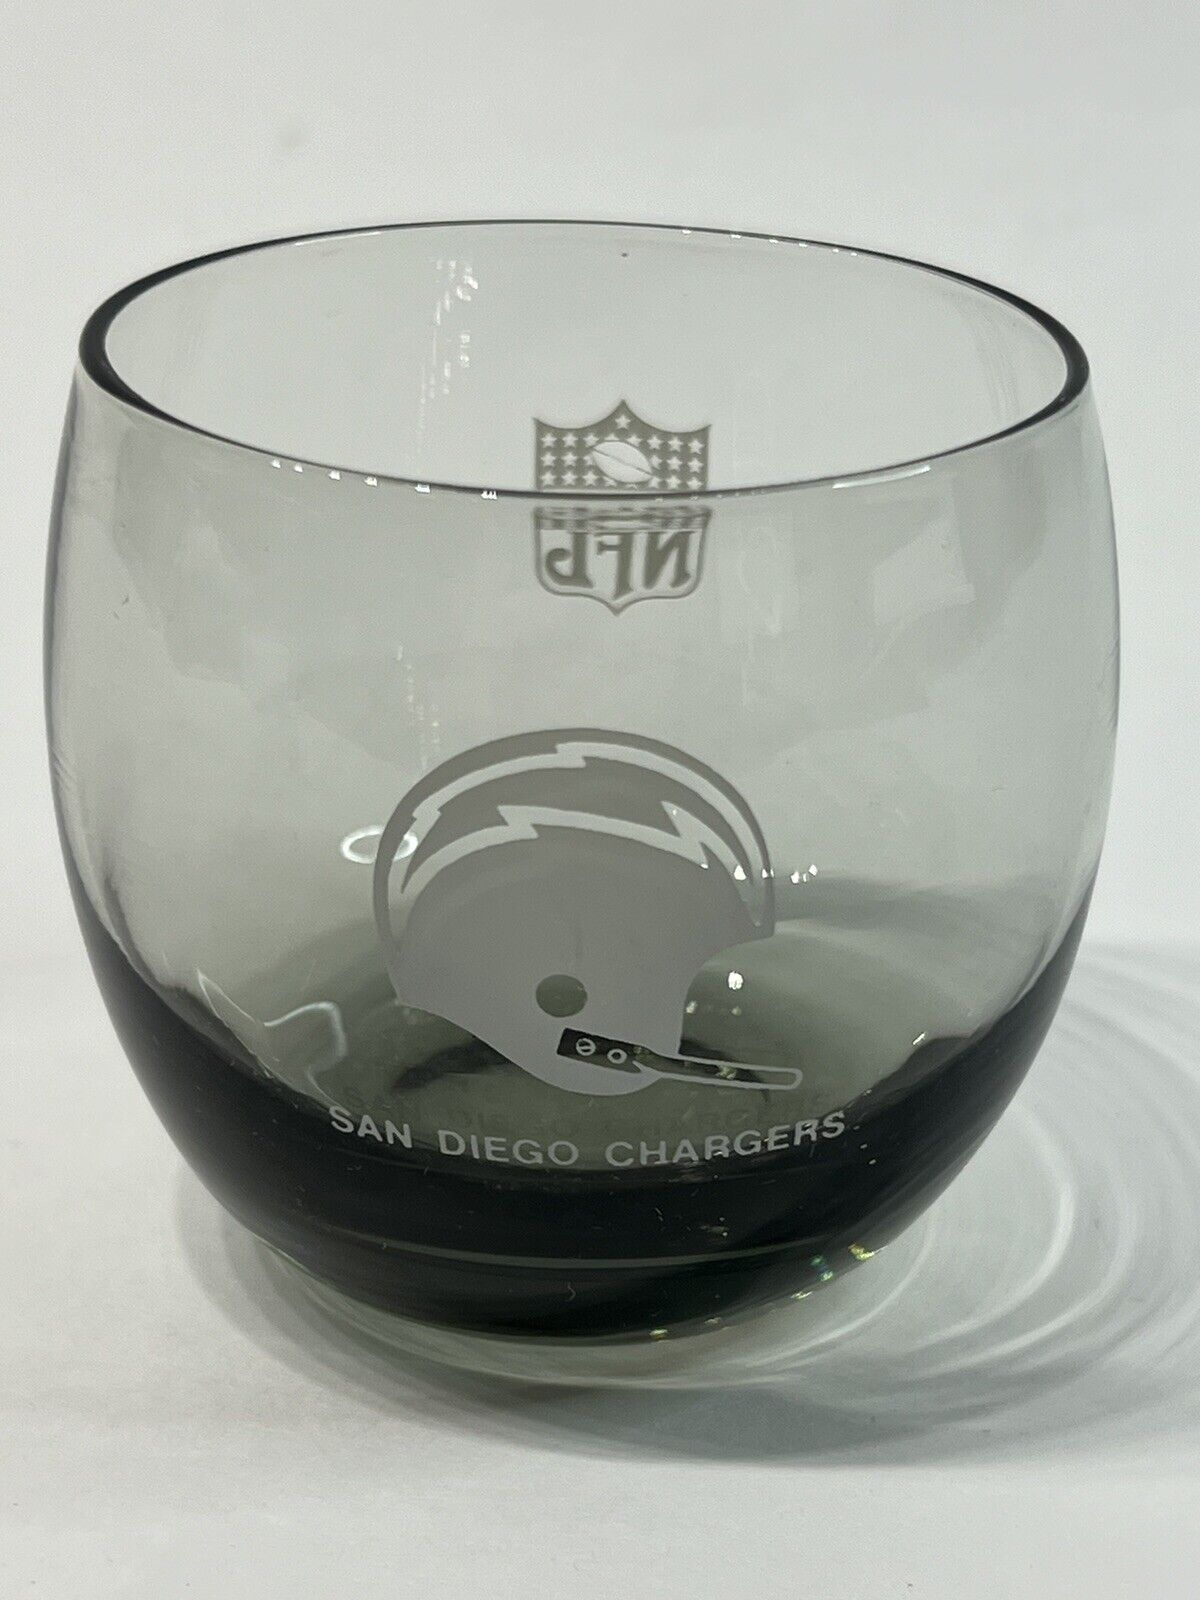 Vintage 1970’s San Diego Chargers Smoke Gray NFL Roly Poly Cocktail Glasses 8 Oz